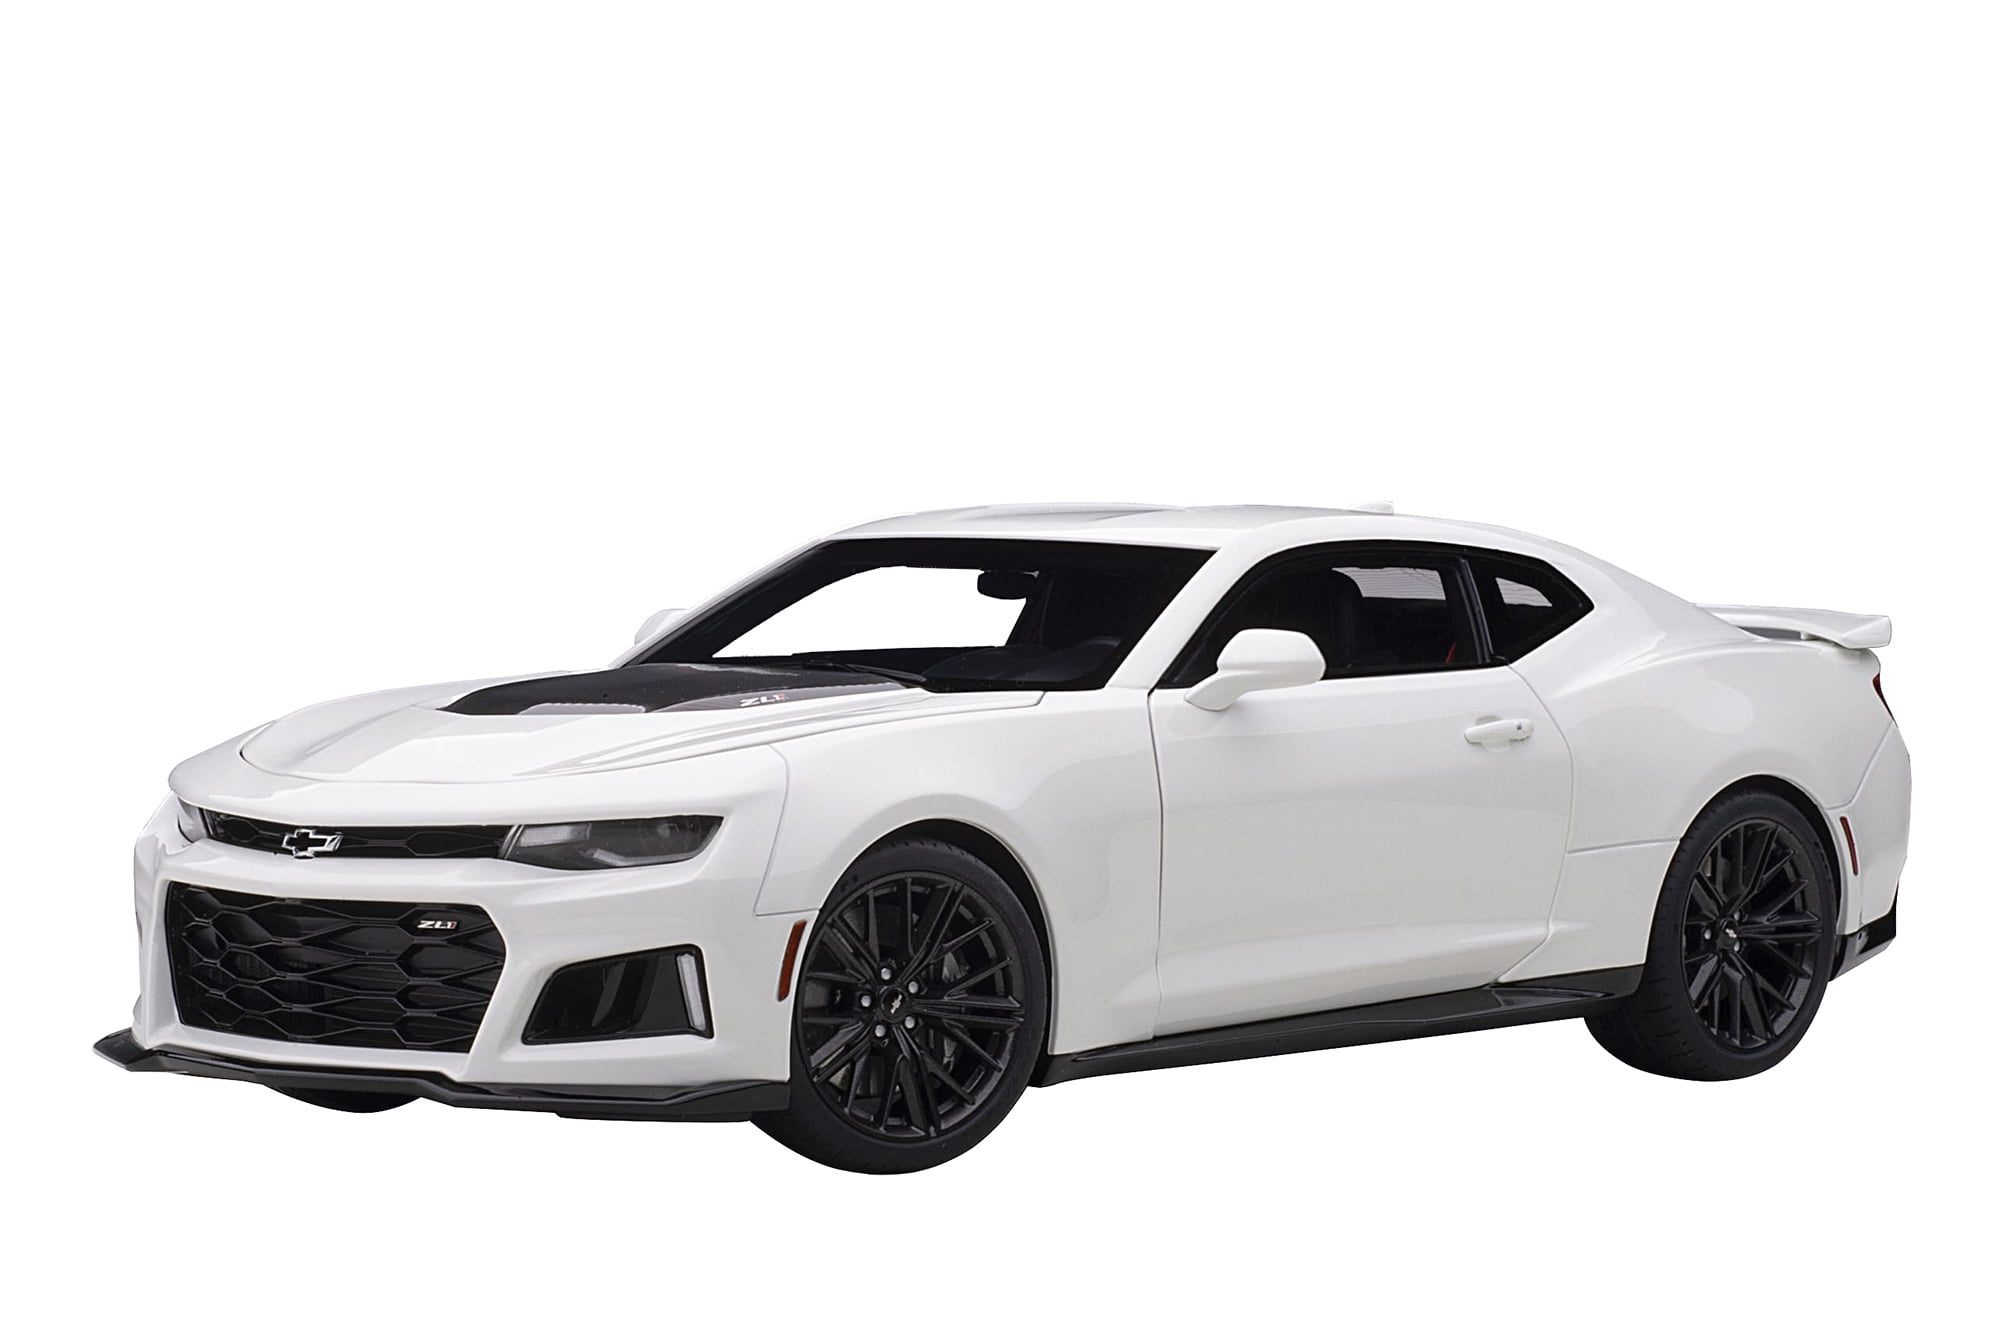 Picture of Autoart 71206 Summit White 1 by 18 Scale Model Car for Chevrolet Camaro ZL1